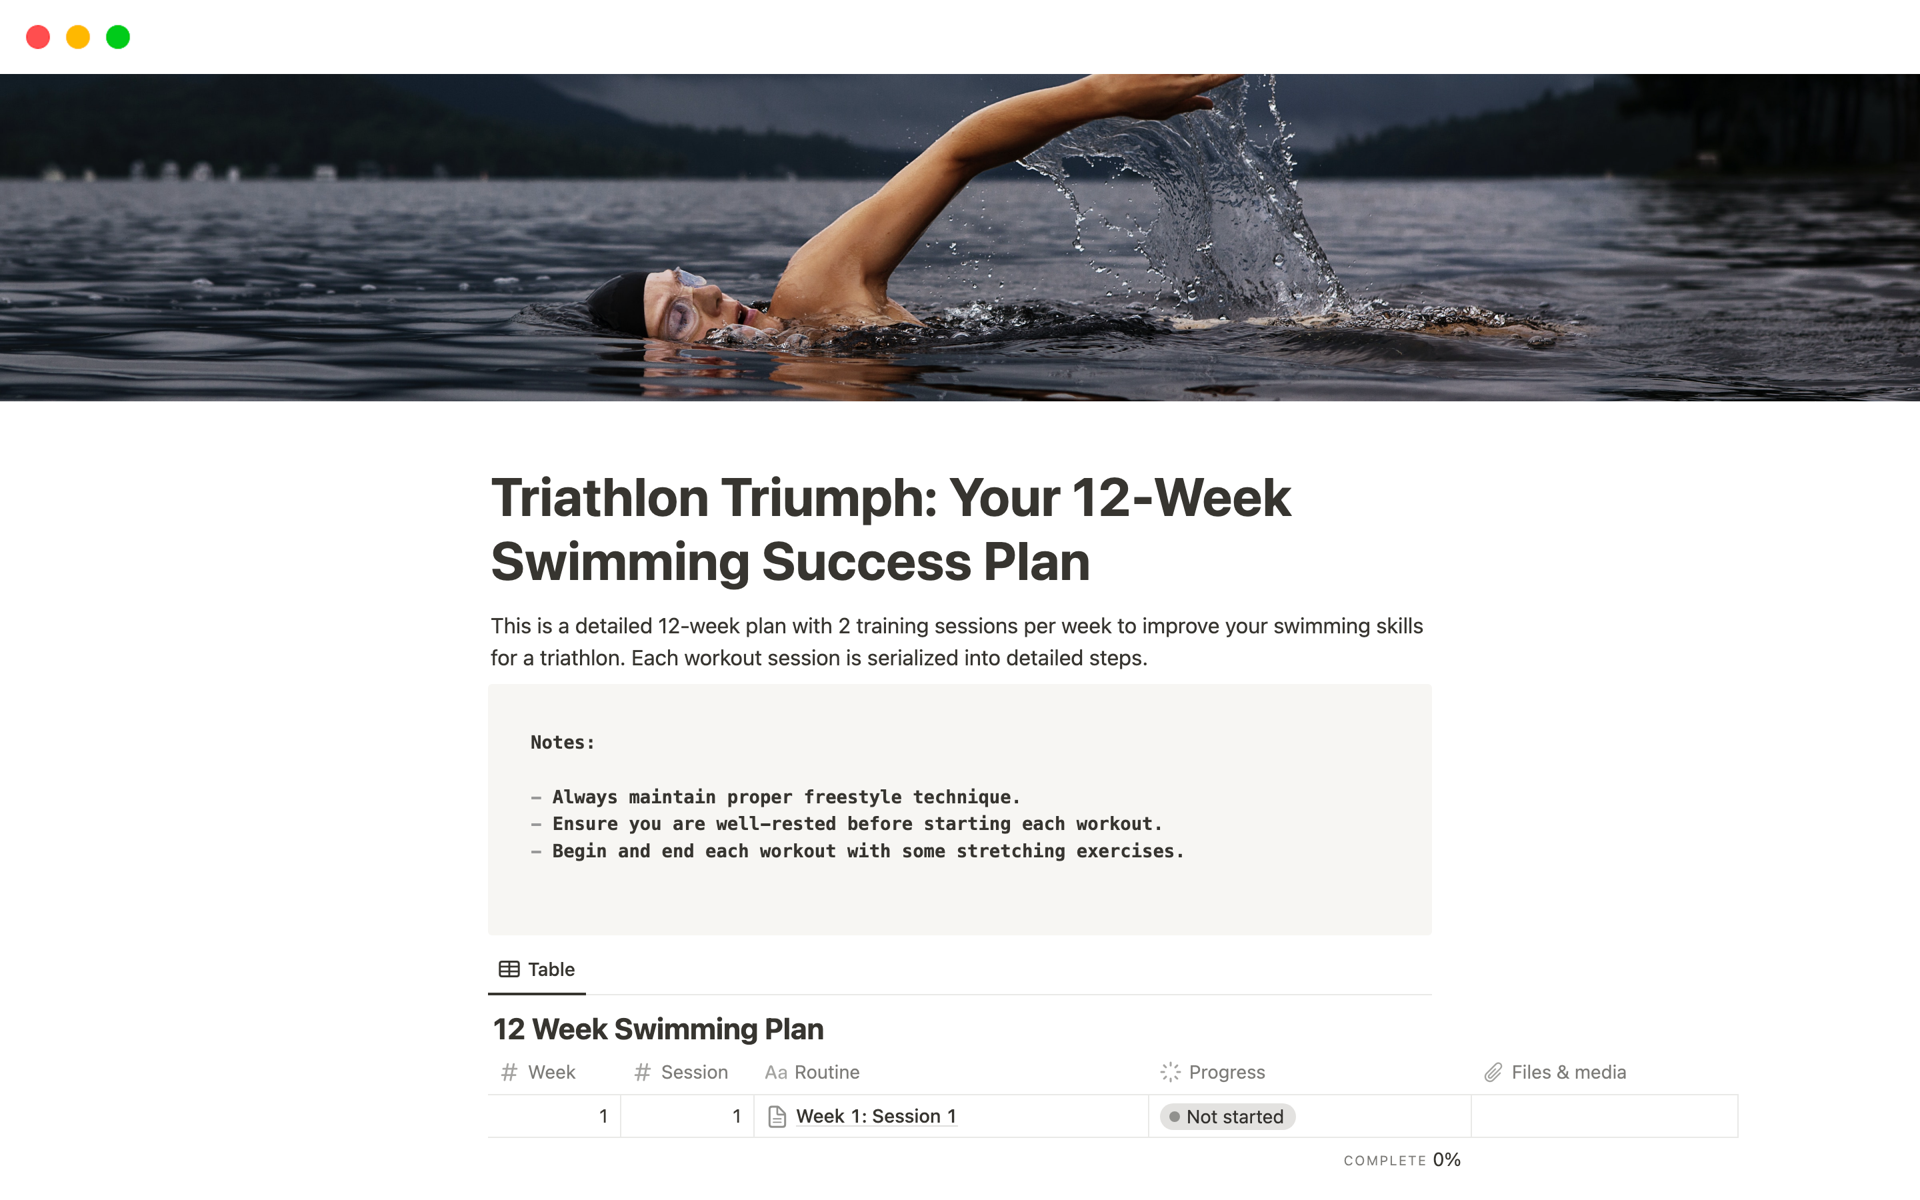 Gain improved swimming skills for your triathlon with our structured 12-week plan, designed specially for beginners with 2 step-by-step training sessions each week.